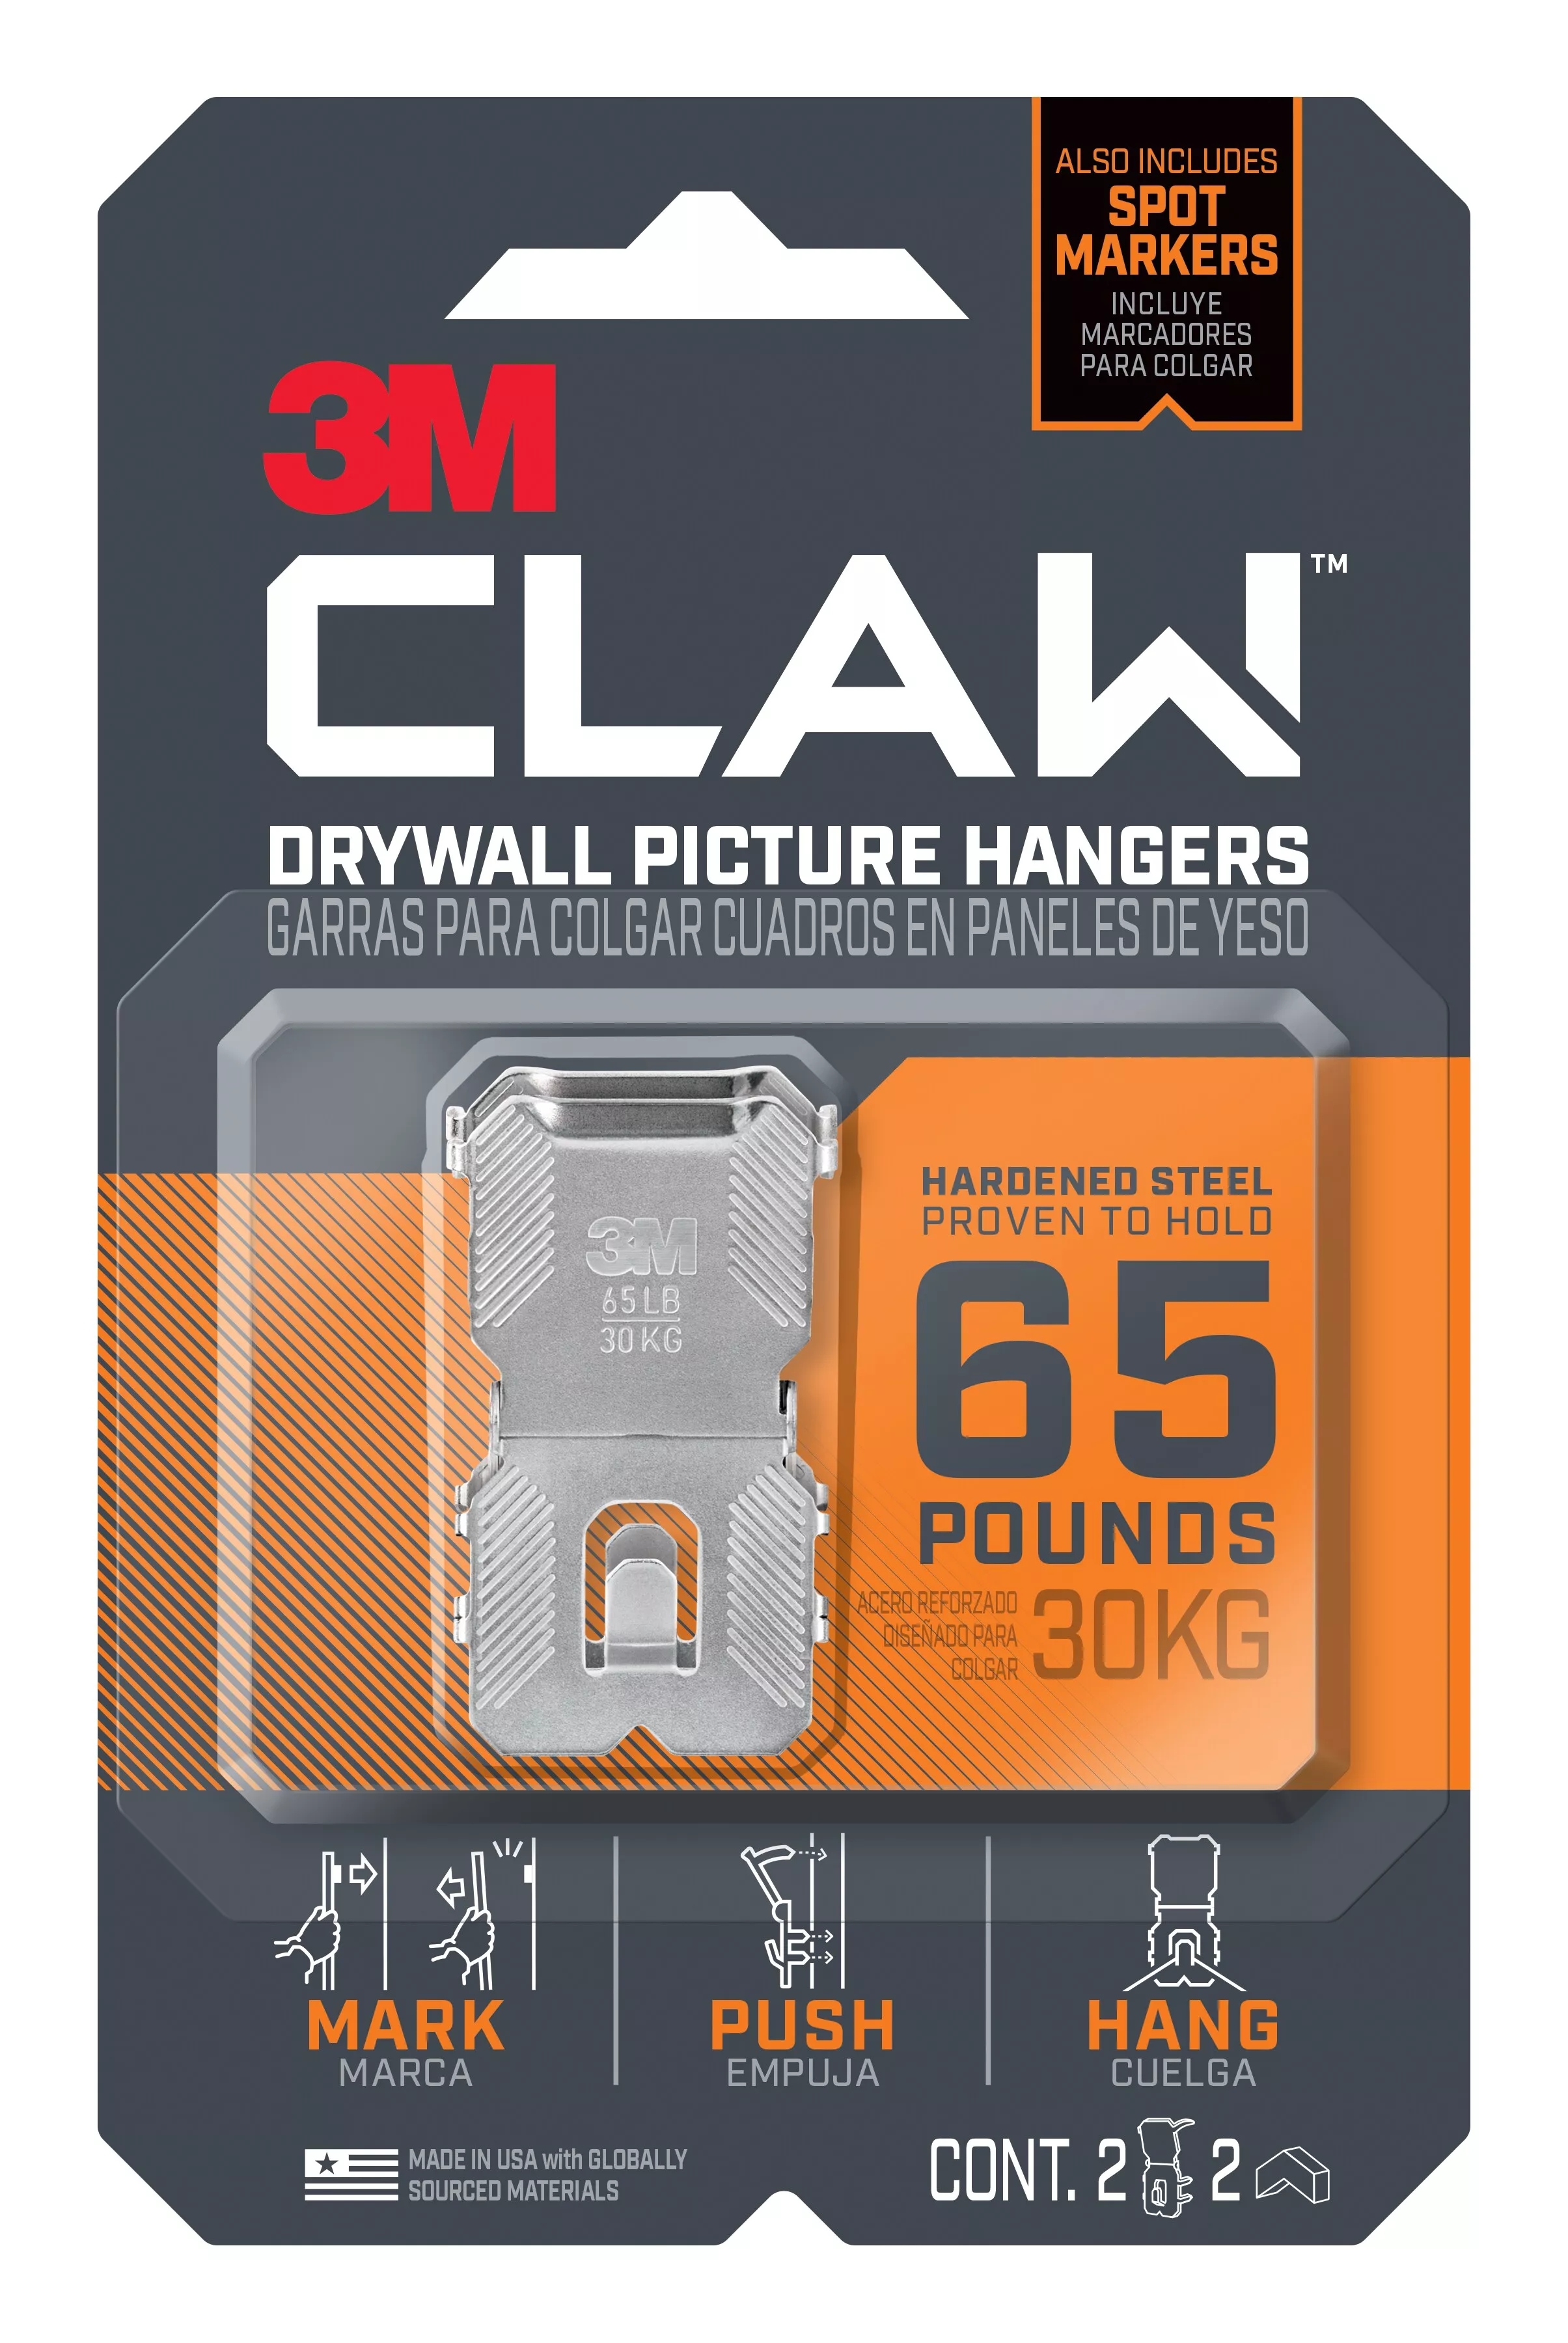 SKU 7100240633 | 3M™ CLAW™ 65lb Drywall Picture Hangers with Spot Markers 3PH65M-2ES